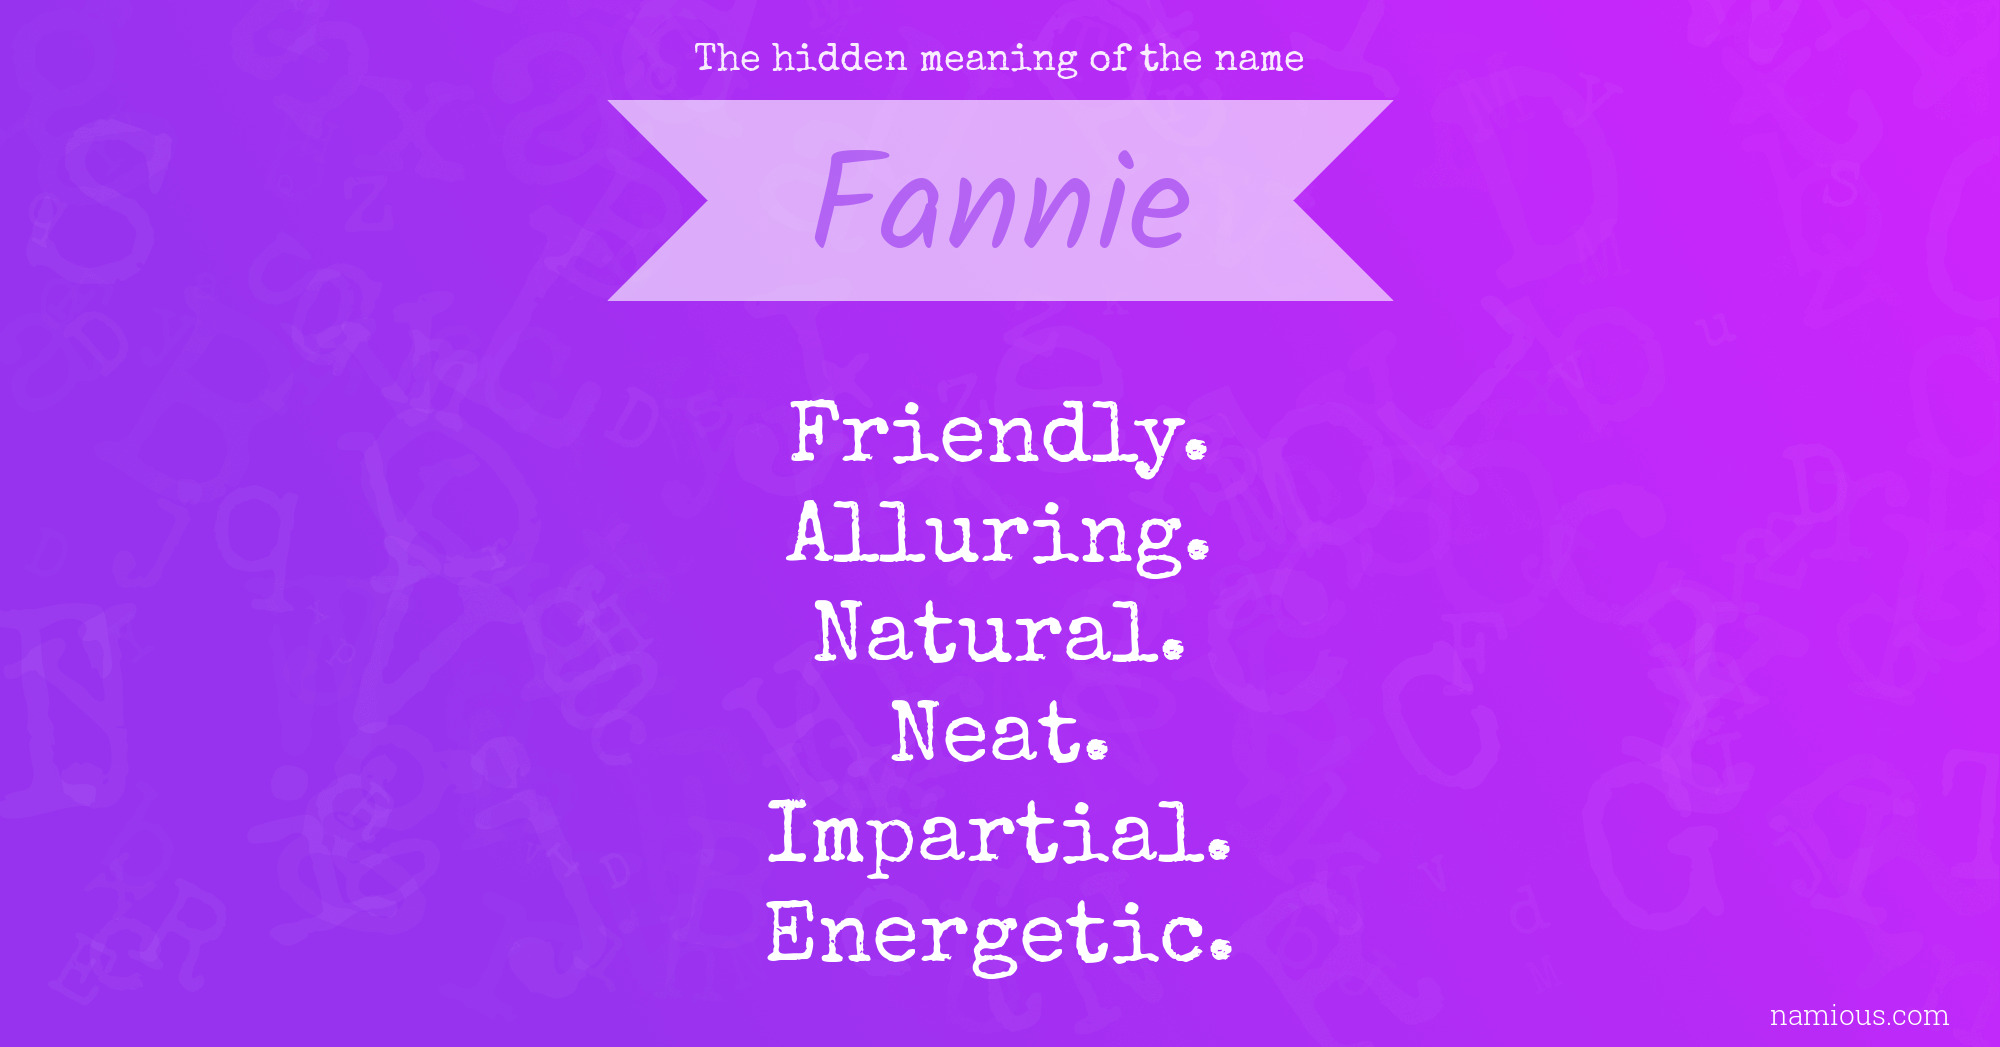 The hidden meaning of the name Fannie